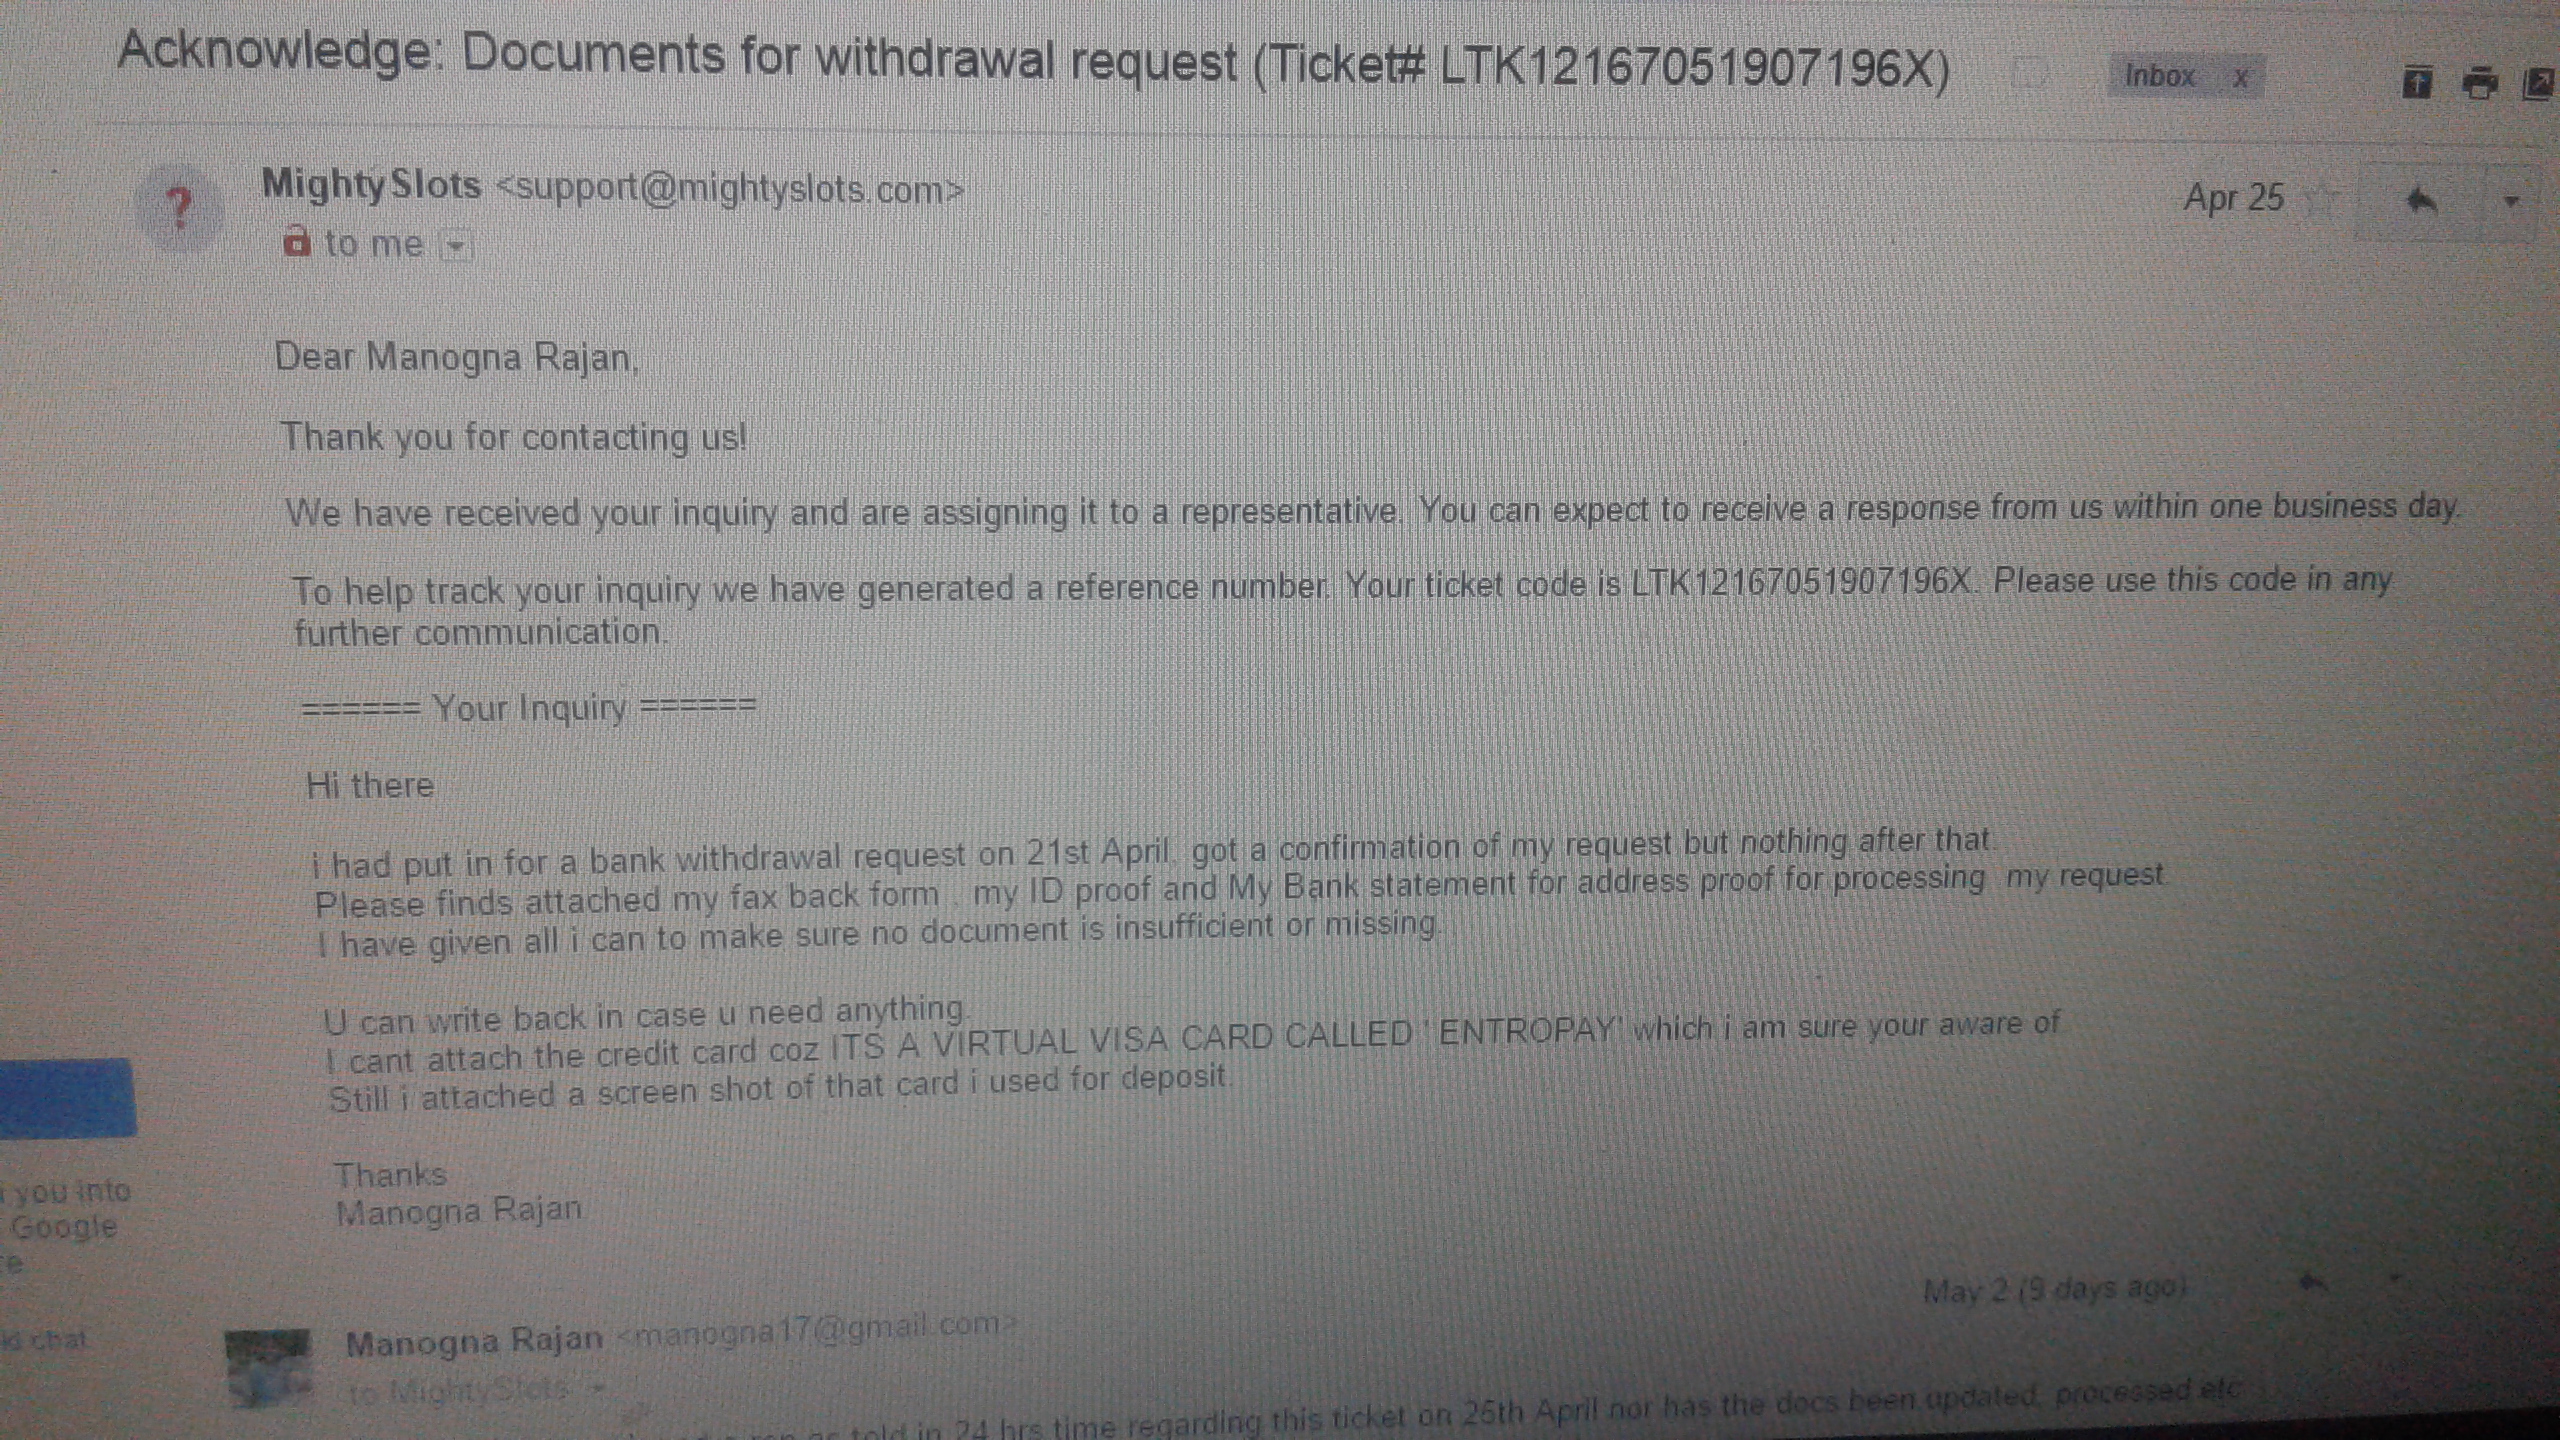 from mightyslots only acknowledgemnt and tickets come nothing more aftr that